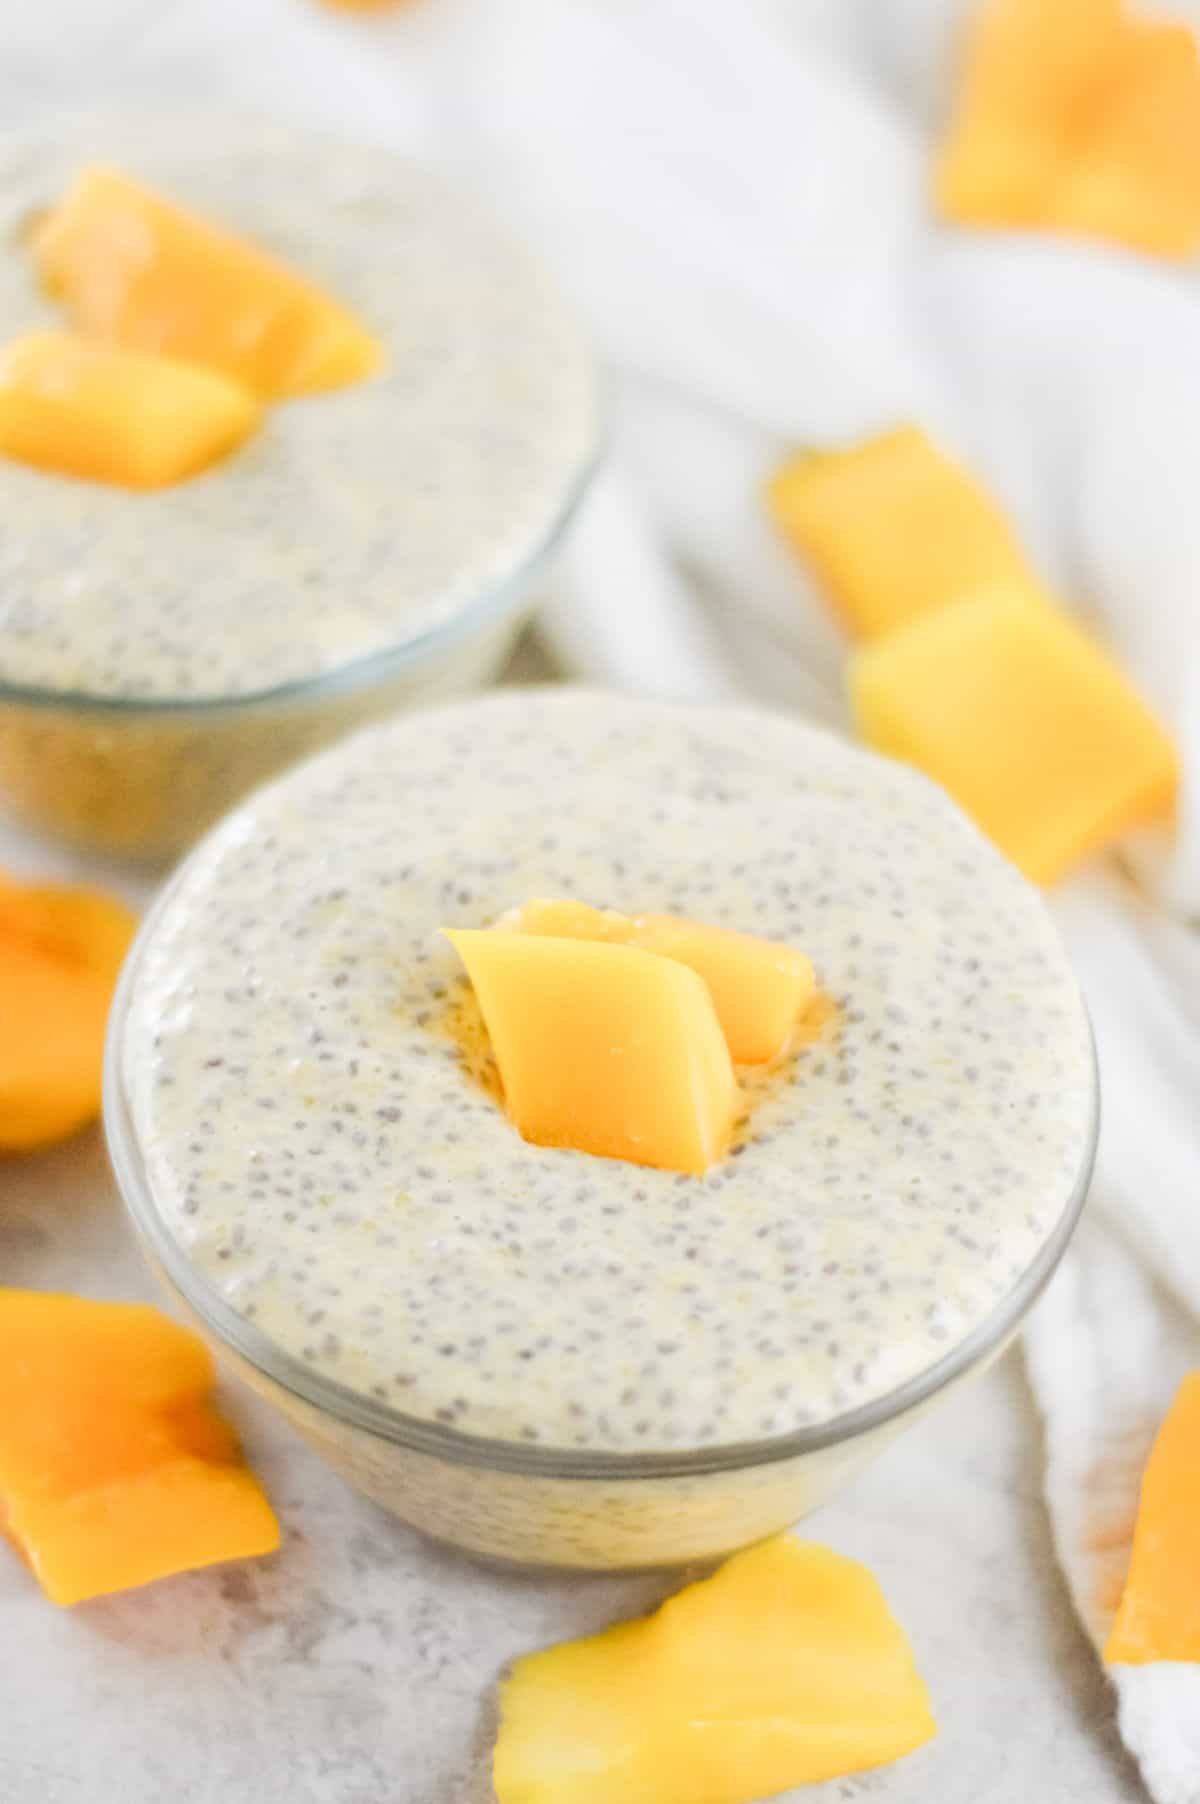 On a white bench, two bowls of chia pudding, garnished with mango sit. Mango pieces scattered around the bowls. A white cloth in the background.